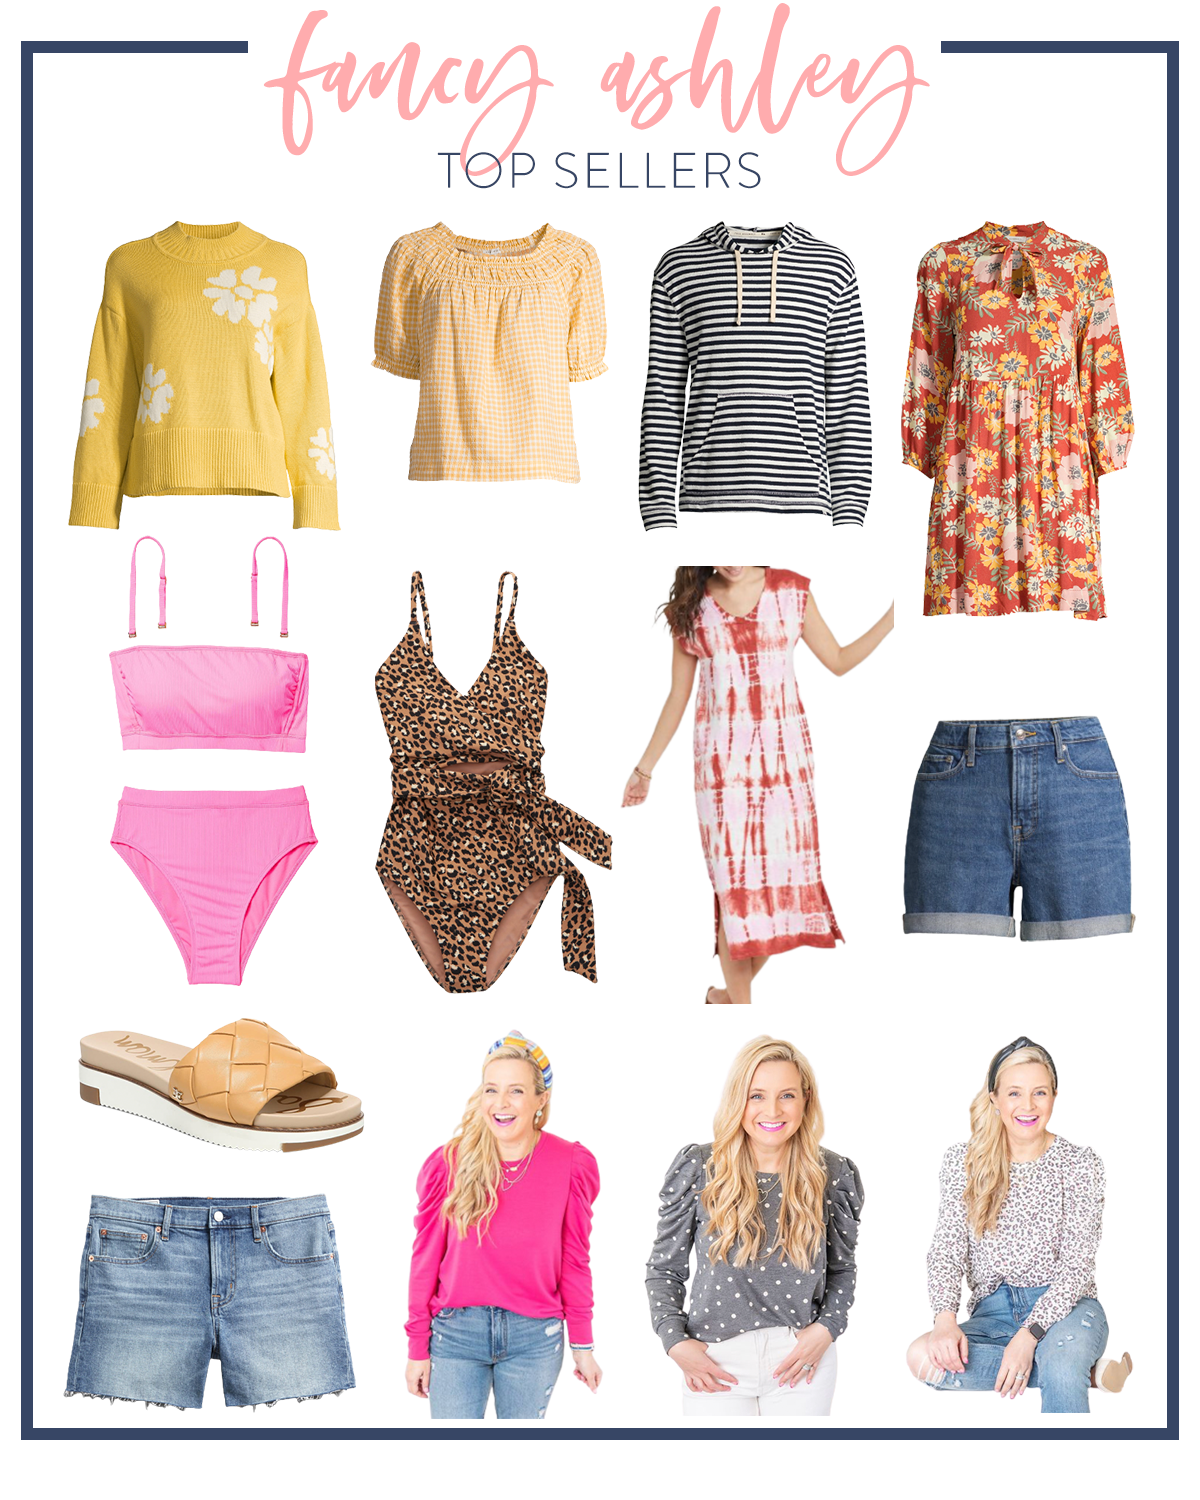 Top Sellers by popular Houston fashion blog, Fancy Ashley: collage image of a yellow and white floral print sweater, Yellow gingham puff sleeve top, black and white stripe hoodie, red floral print tie neck long sleeve dress, pink two piece swimsuit, leopard print one piece swimsuit, red and white tie dye maxi dress, denim shorts, tan slide sandals, pink puff sleeve shirt, grey and white polka dot puff sleeve top, and leopard print puff sleeve top. 